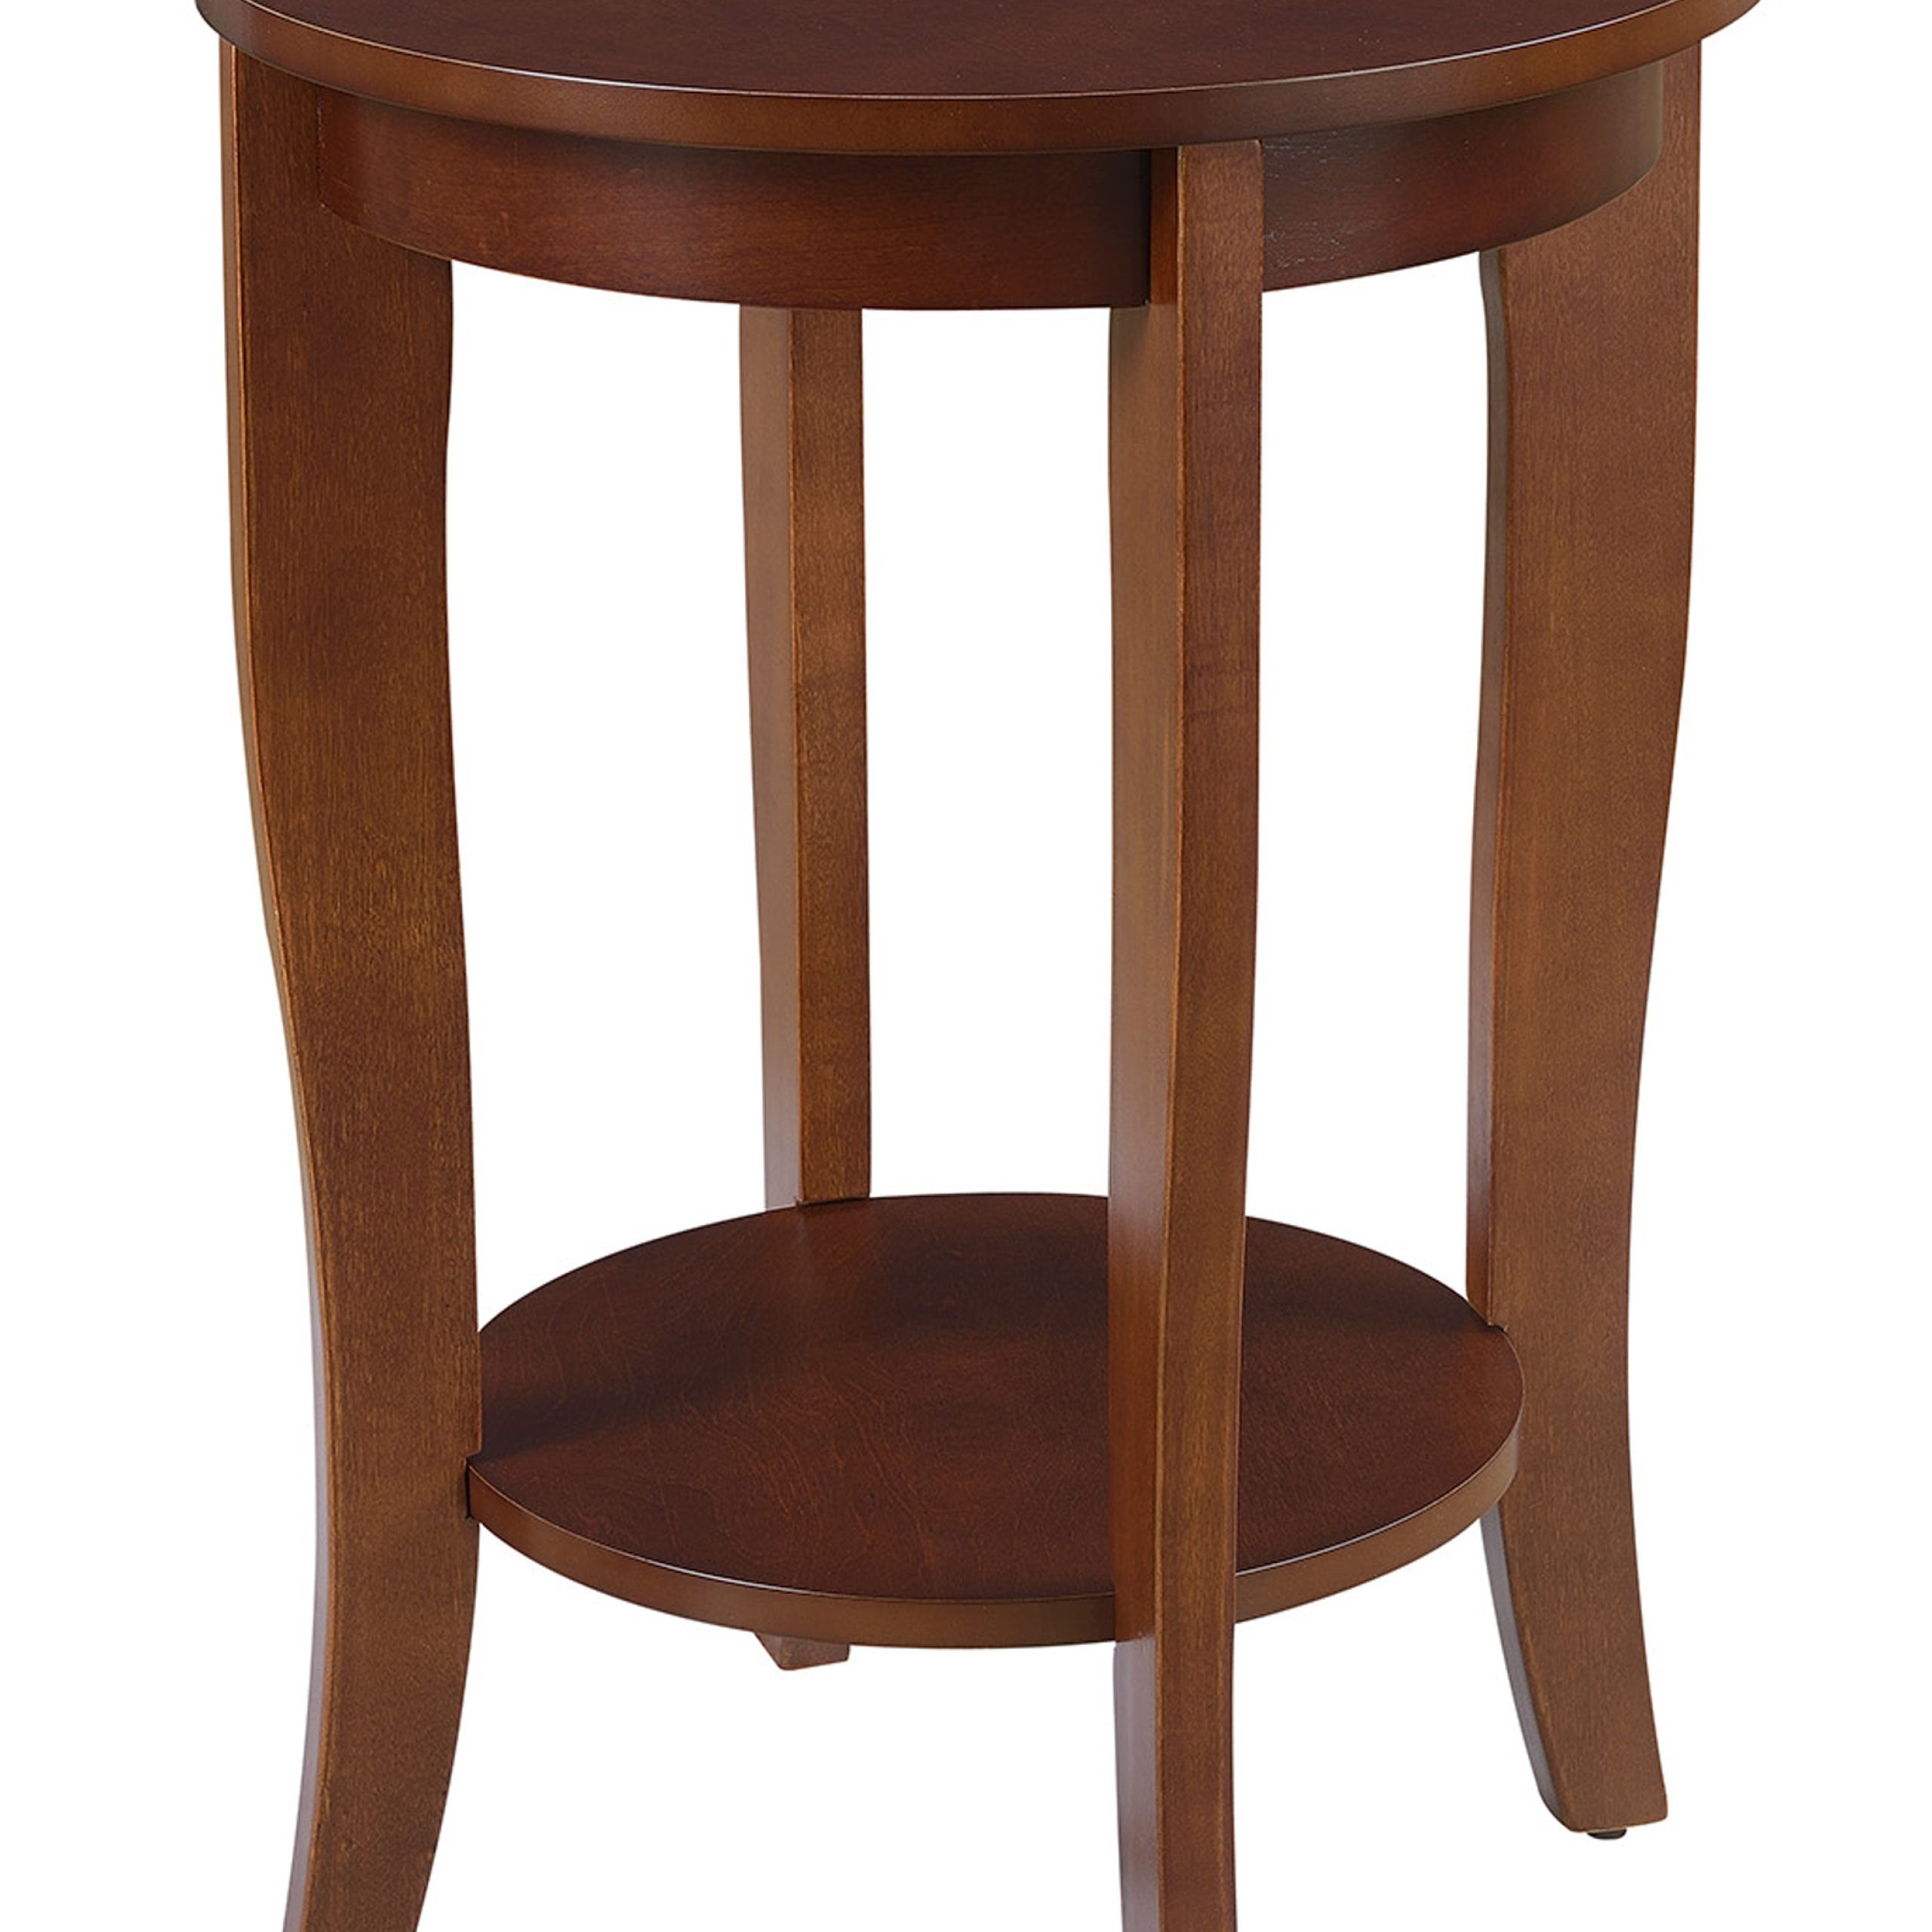 American Heritage Round End Table R6 236, Mahogany Finish 95285418954 Inside American Heritage Round Coffee Tables (Gallery 9 of 20)